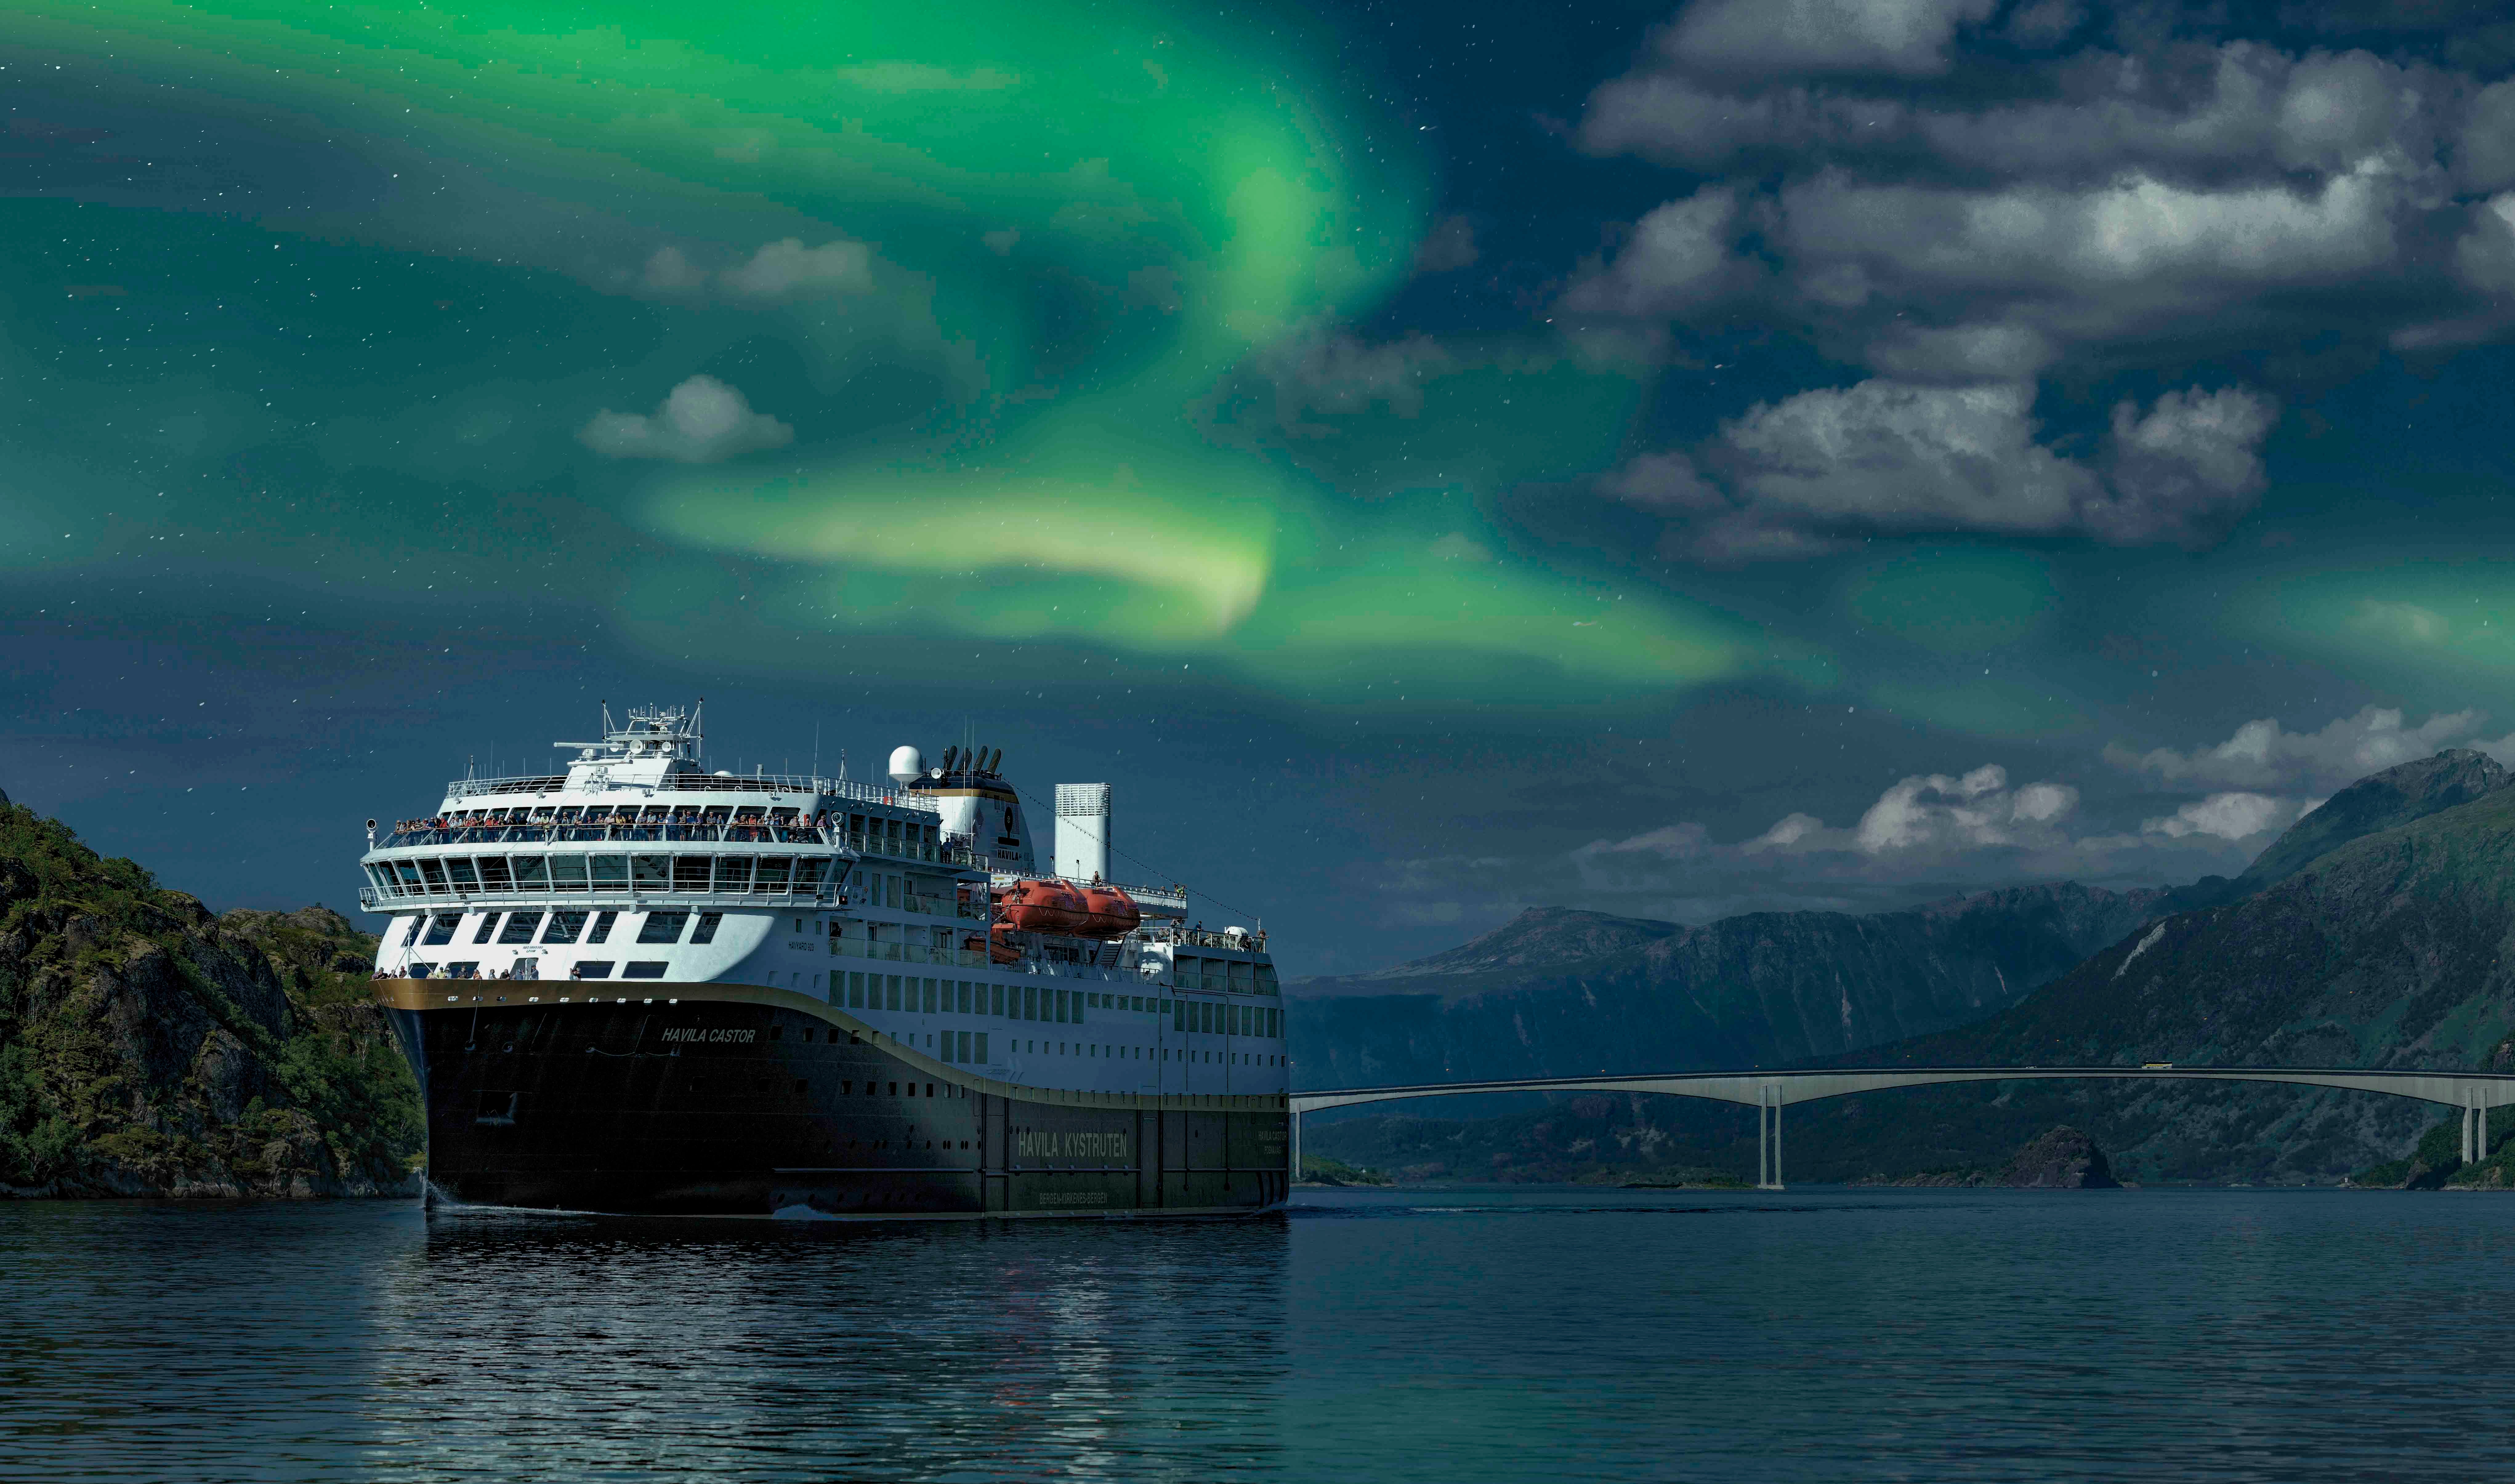 Havila ships use batteries for four hours of silent sailing in search of the Northern Lights